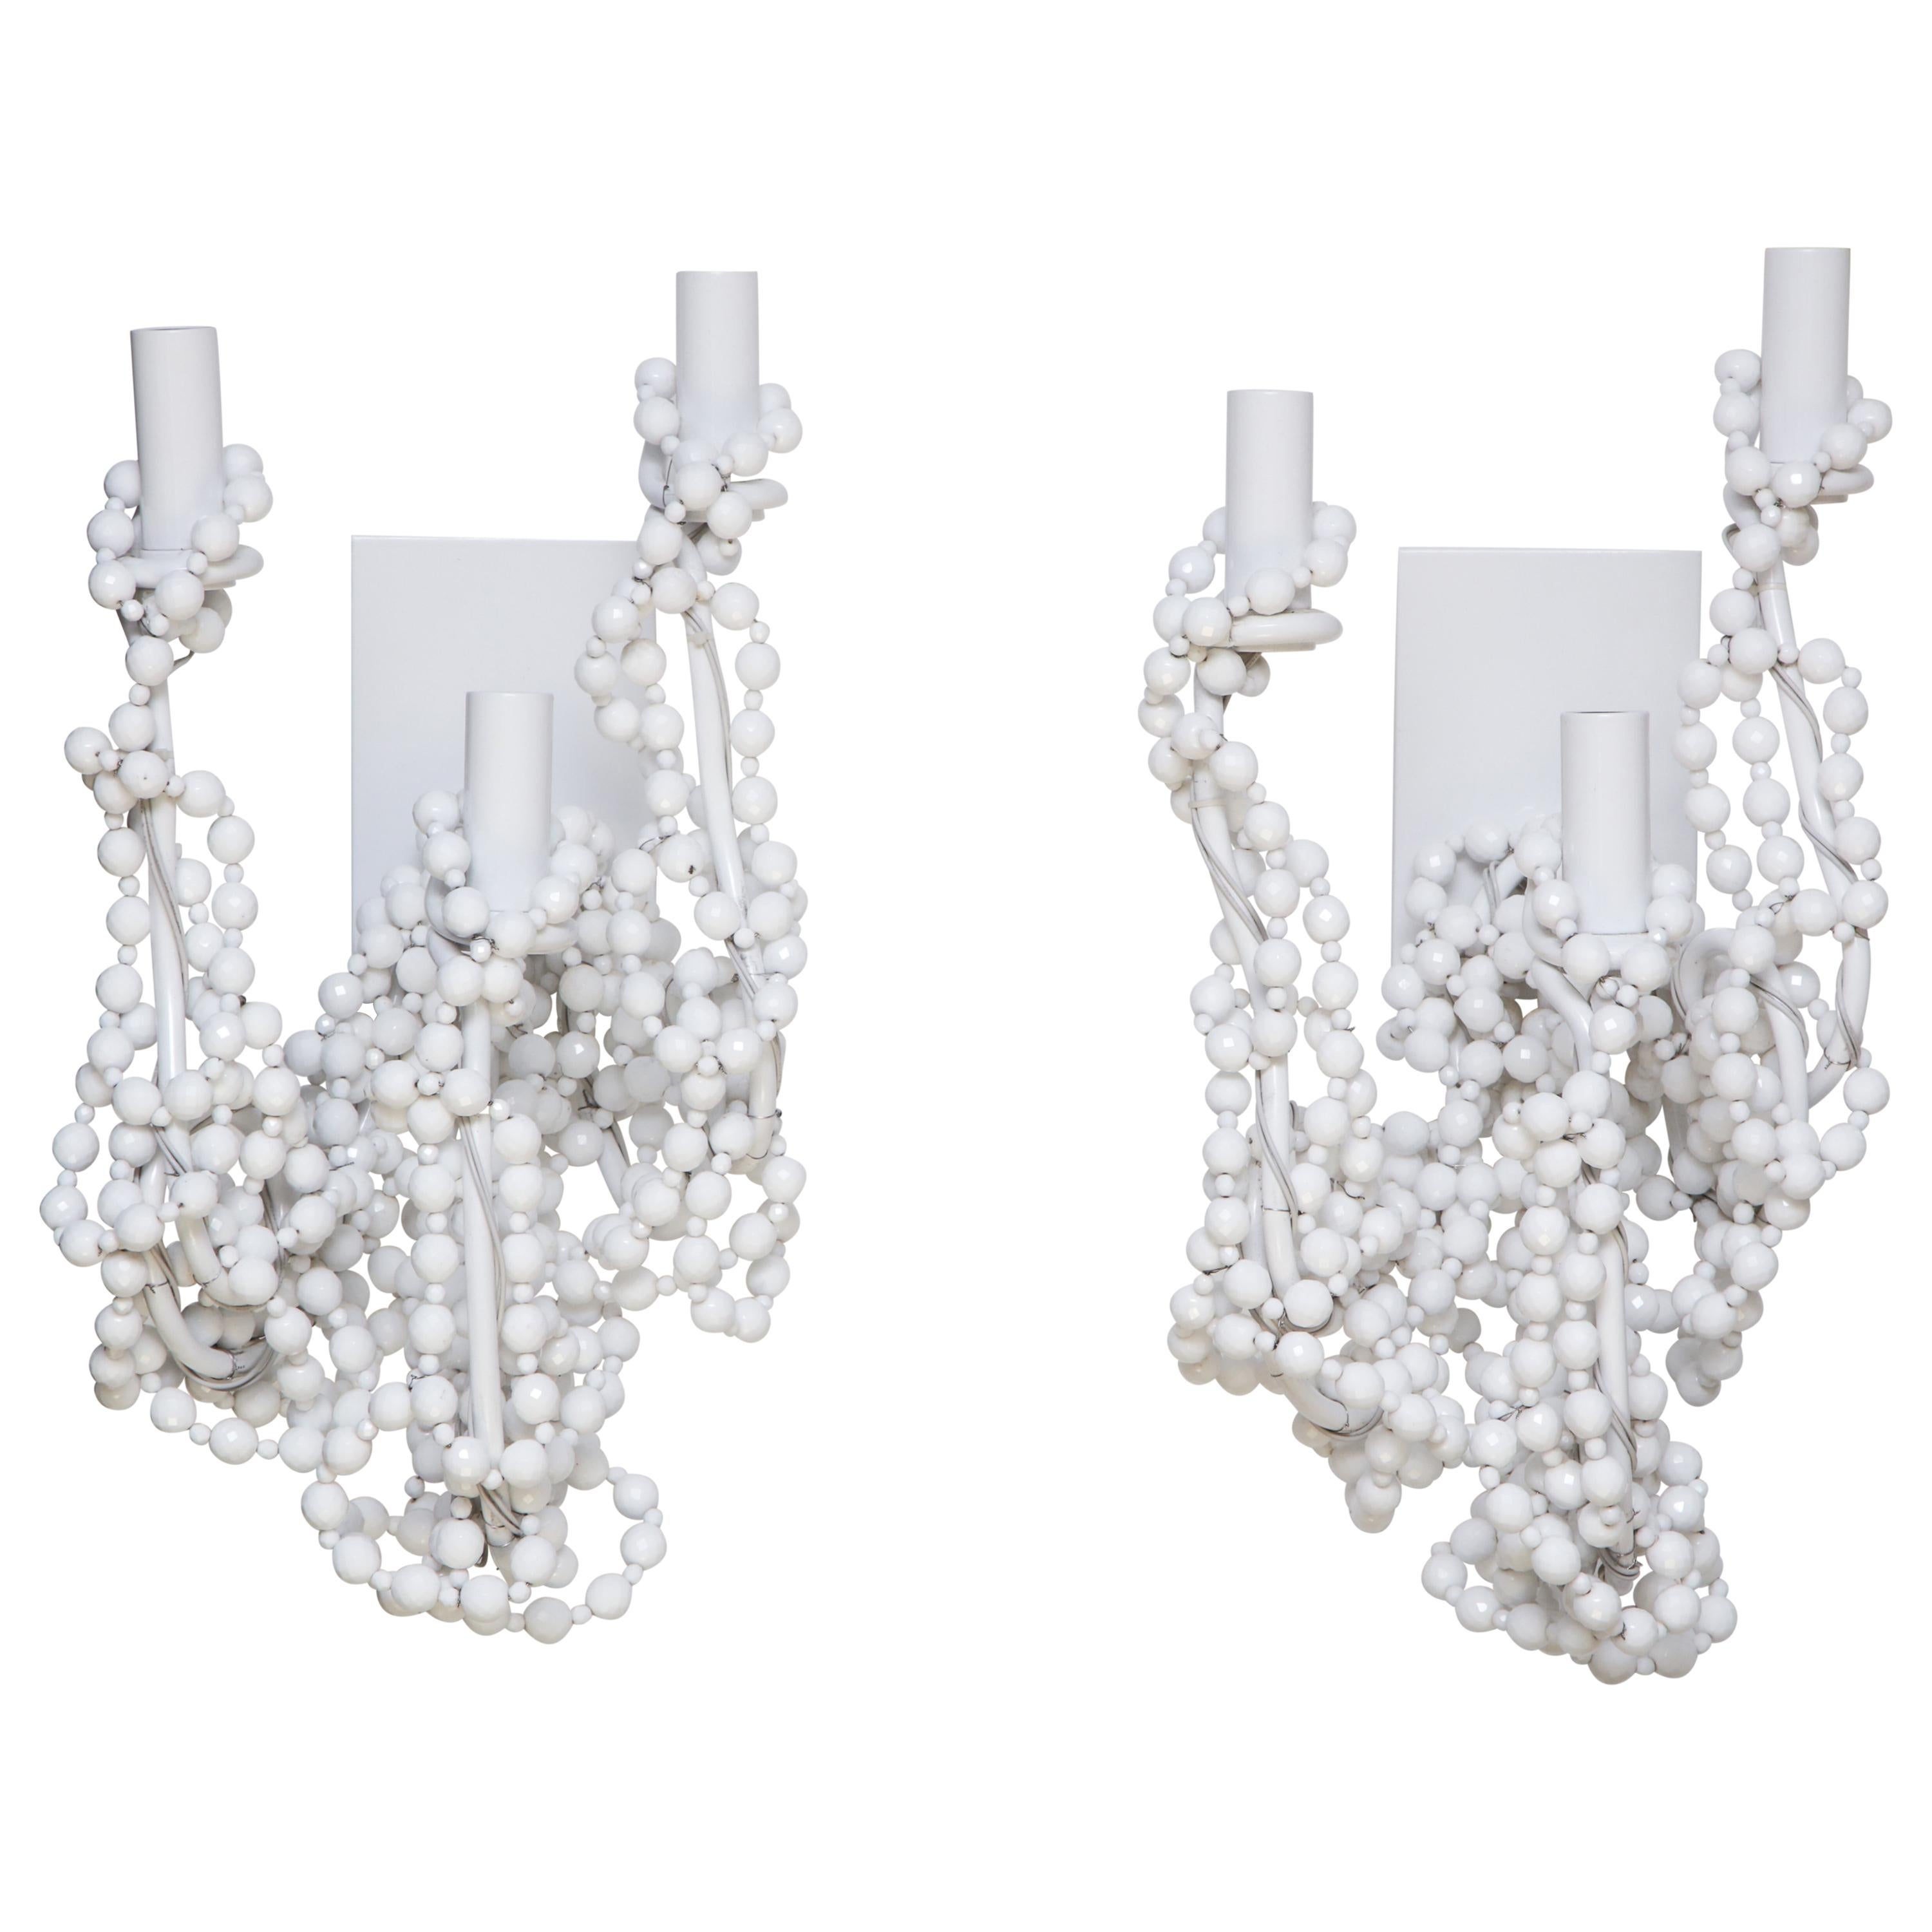 Pair of "Coco" wall Sconces by Brand Van Egmond